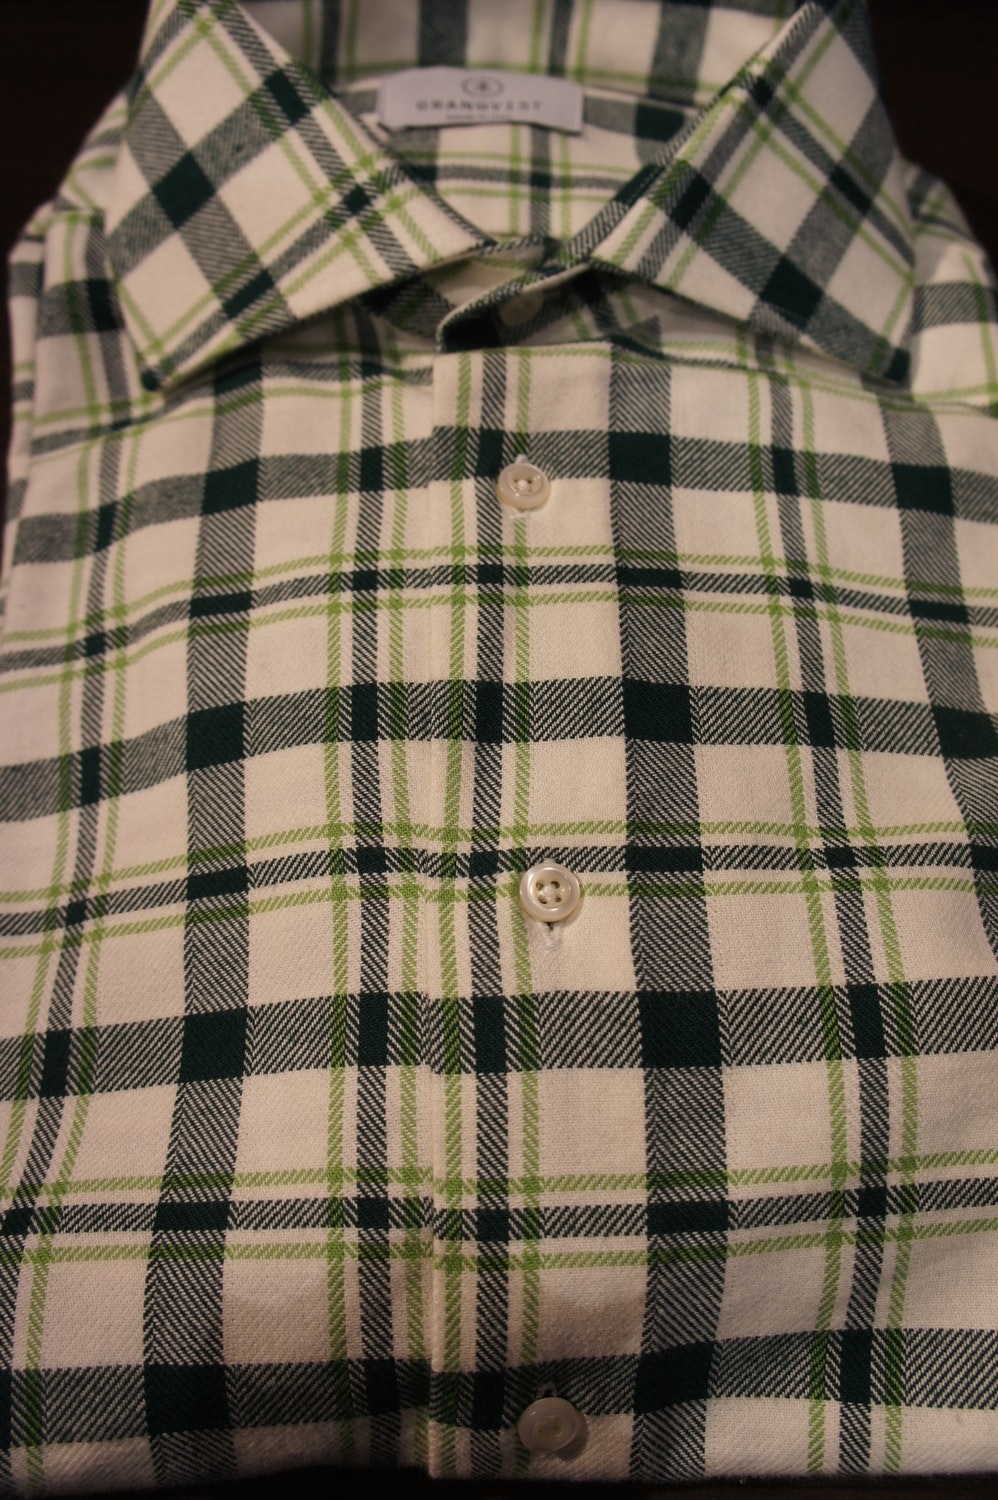 Check Flannel Shirt - Off White/Green